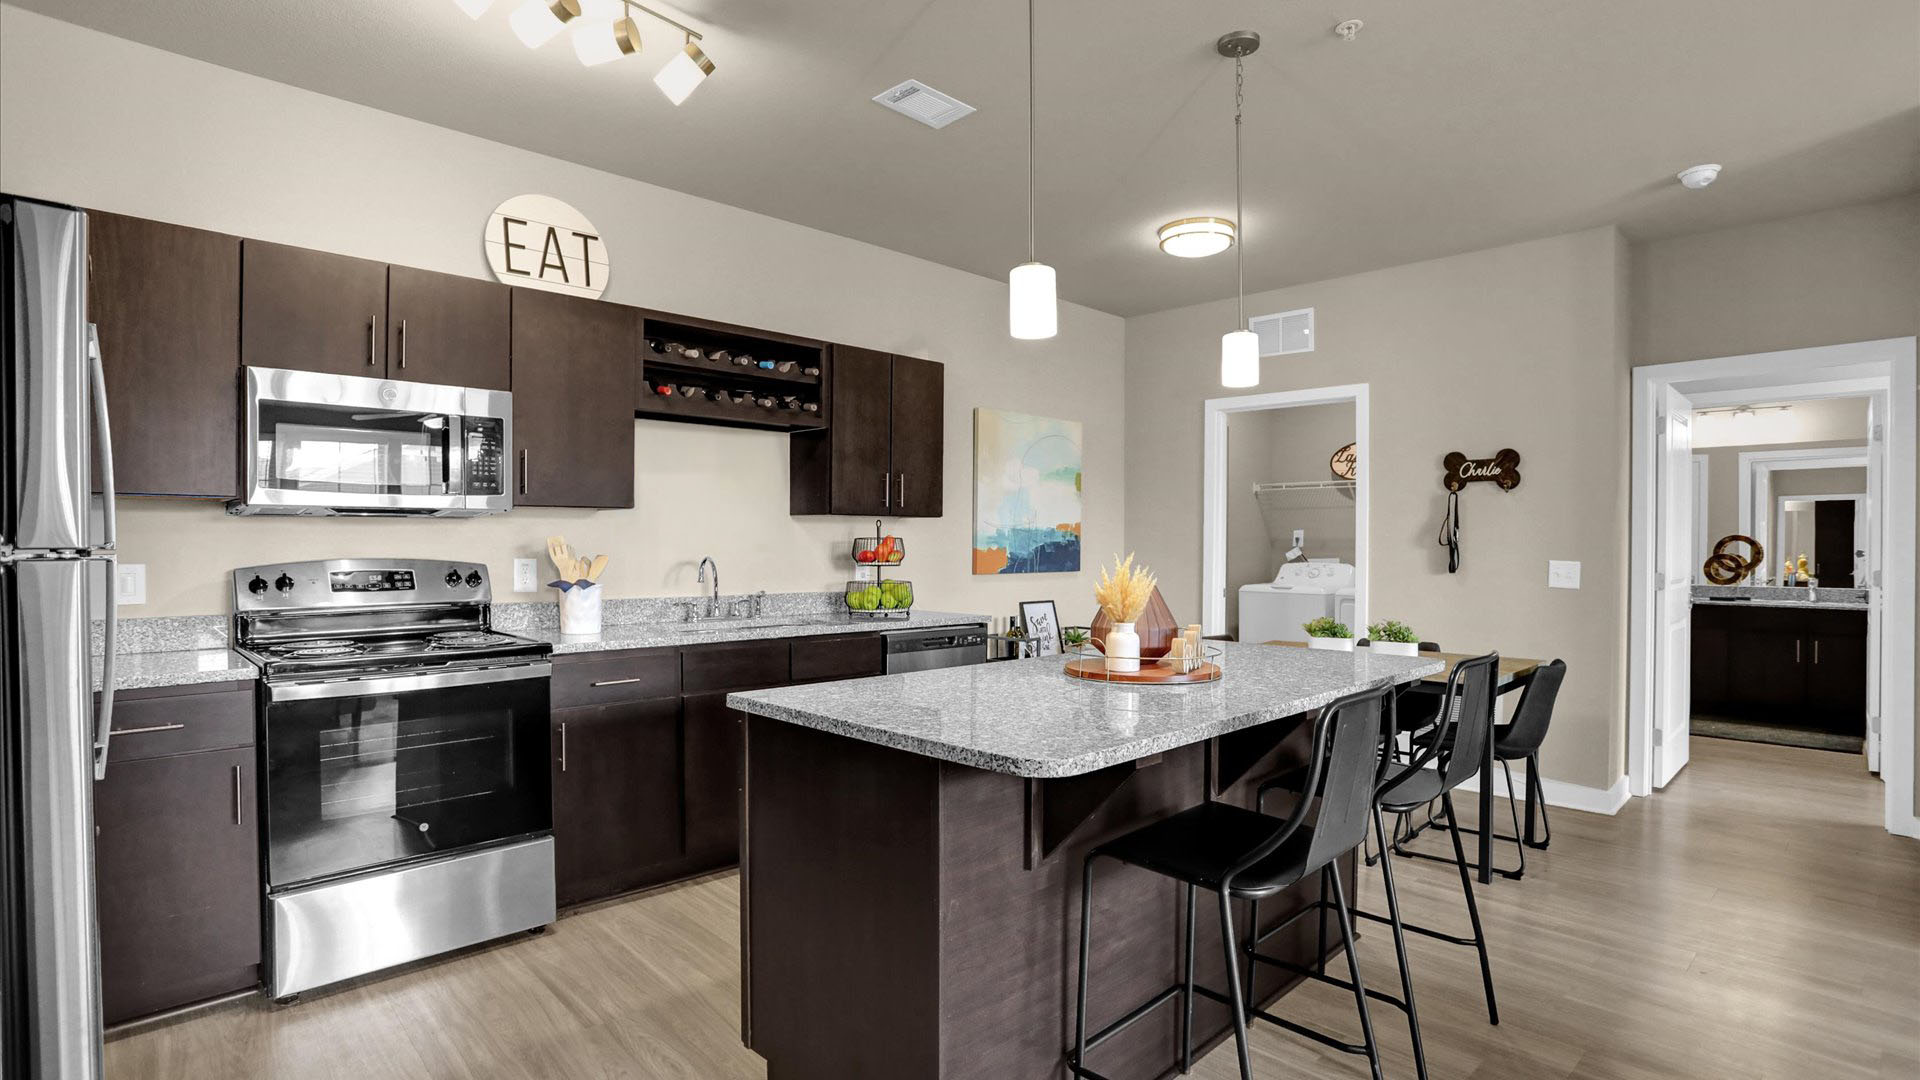 Modern Kitchens at Springs at Ashby in Collierville, TN